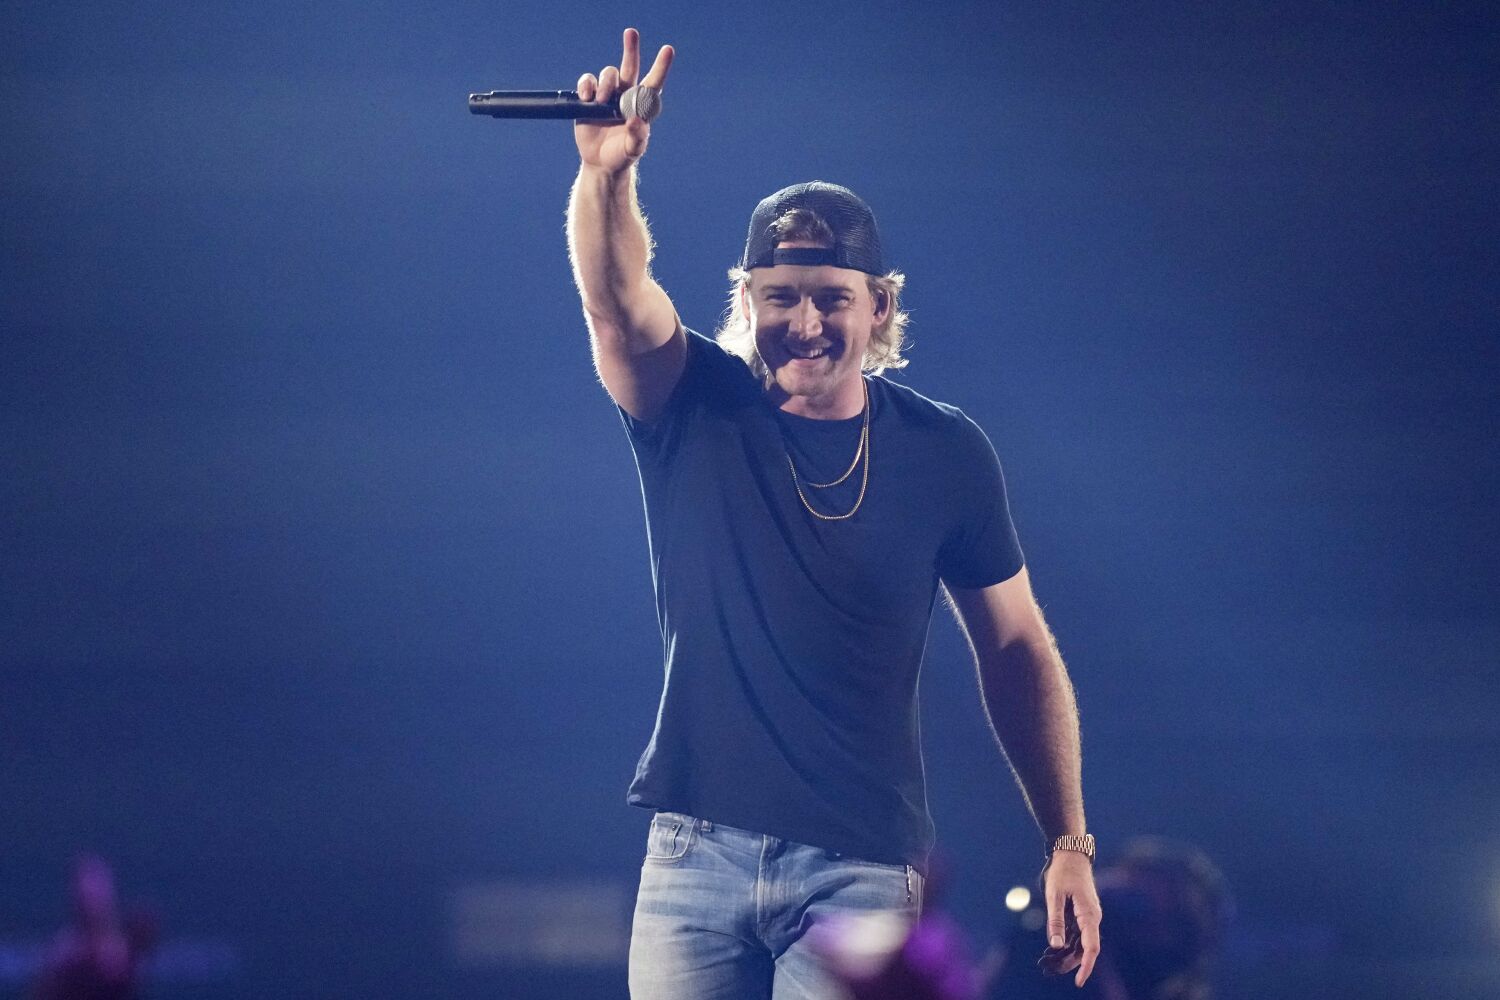 Just days after returning to the stage, Morgan Wallen halts his tour for six weeks